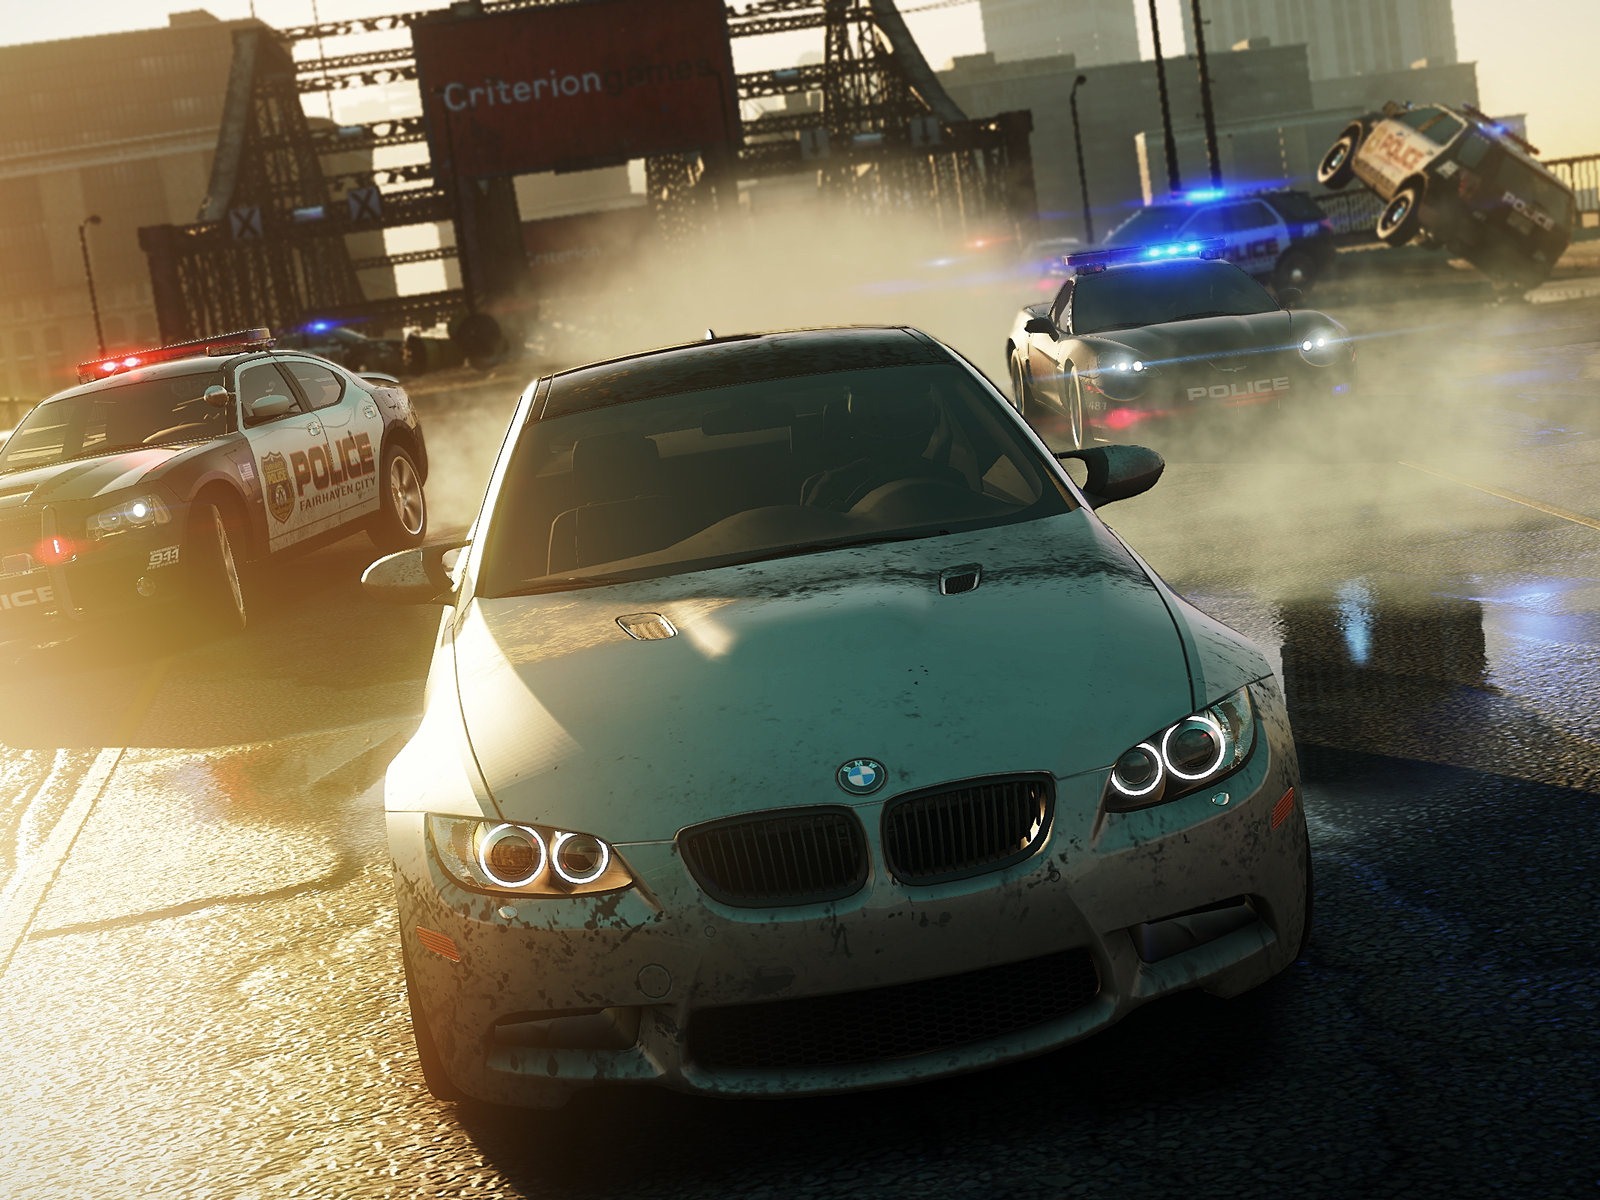 Need for Speed: Most Wanted 极品飞车17：最高通缉 高清壁纸19 - 1600x1200